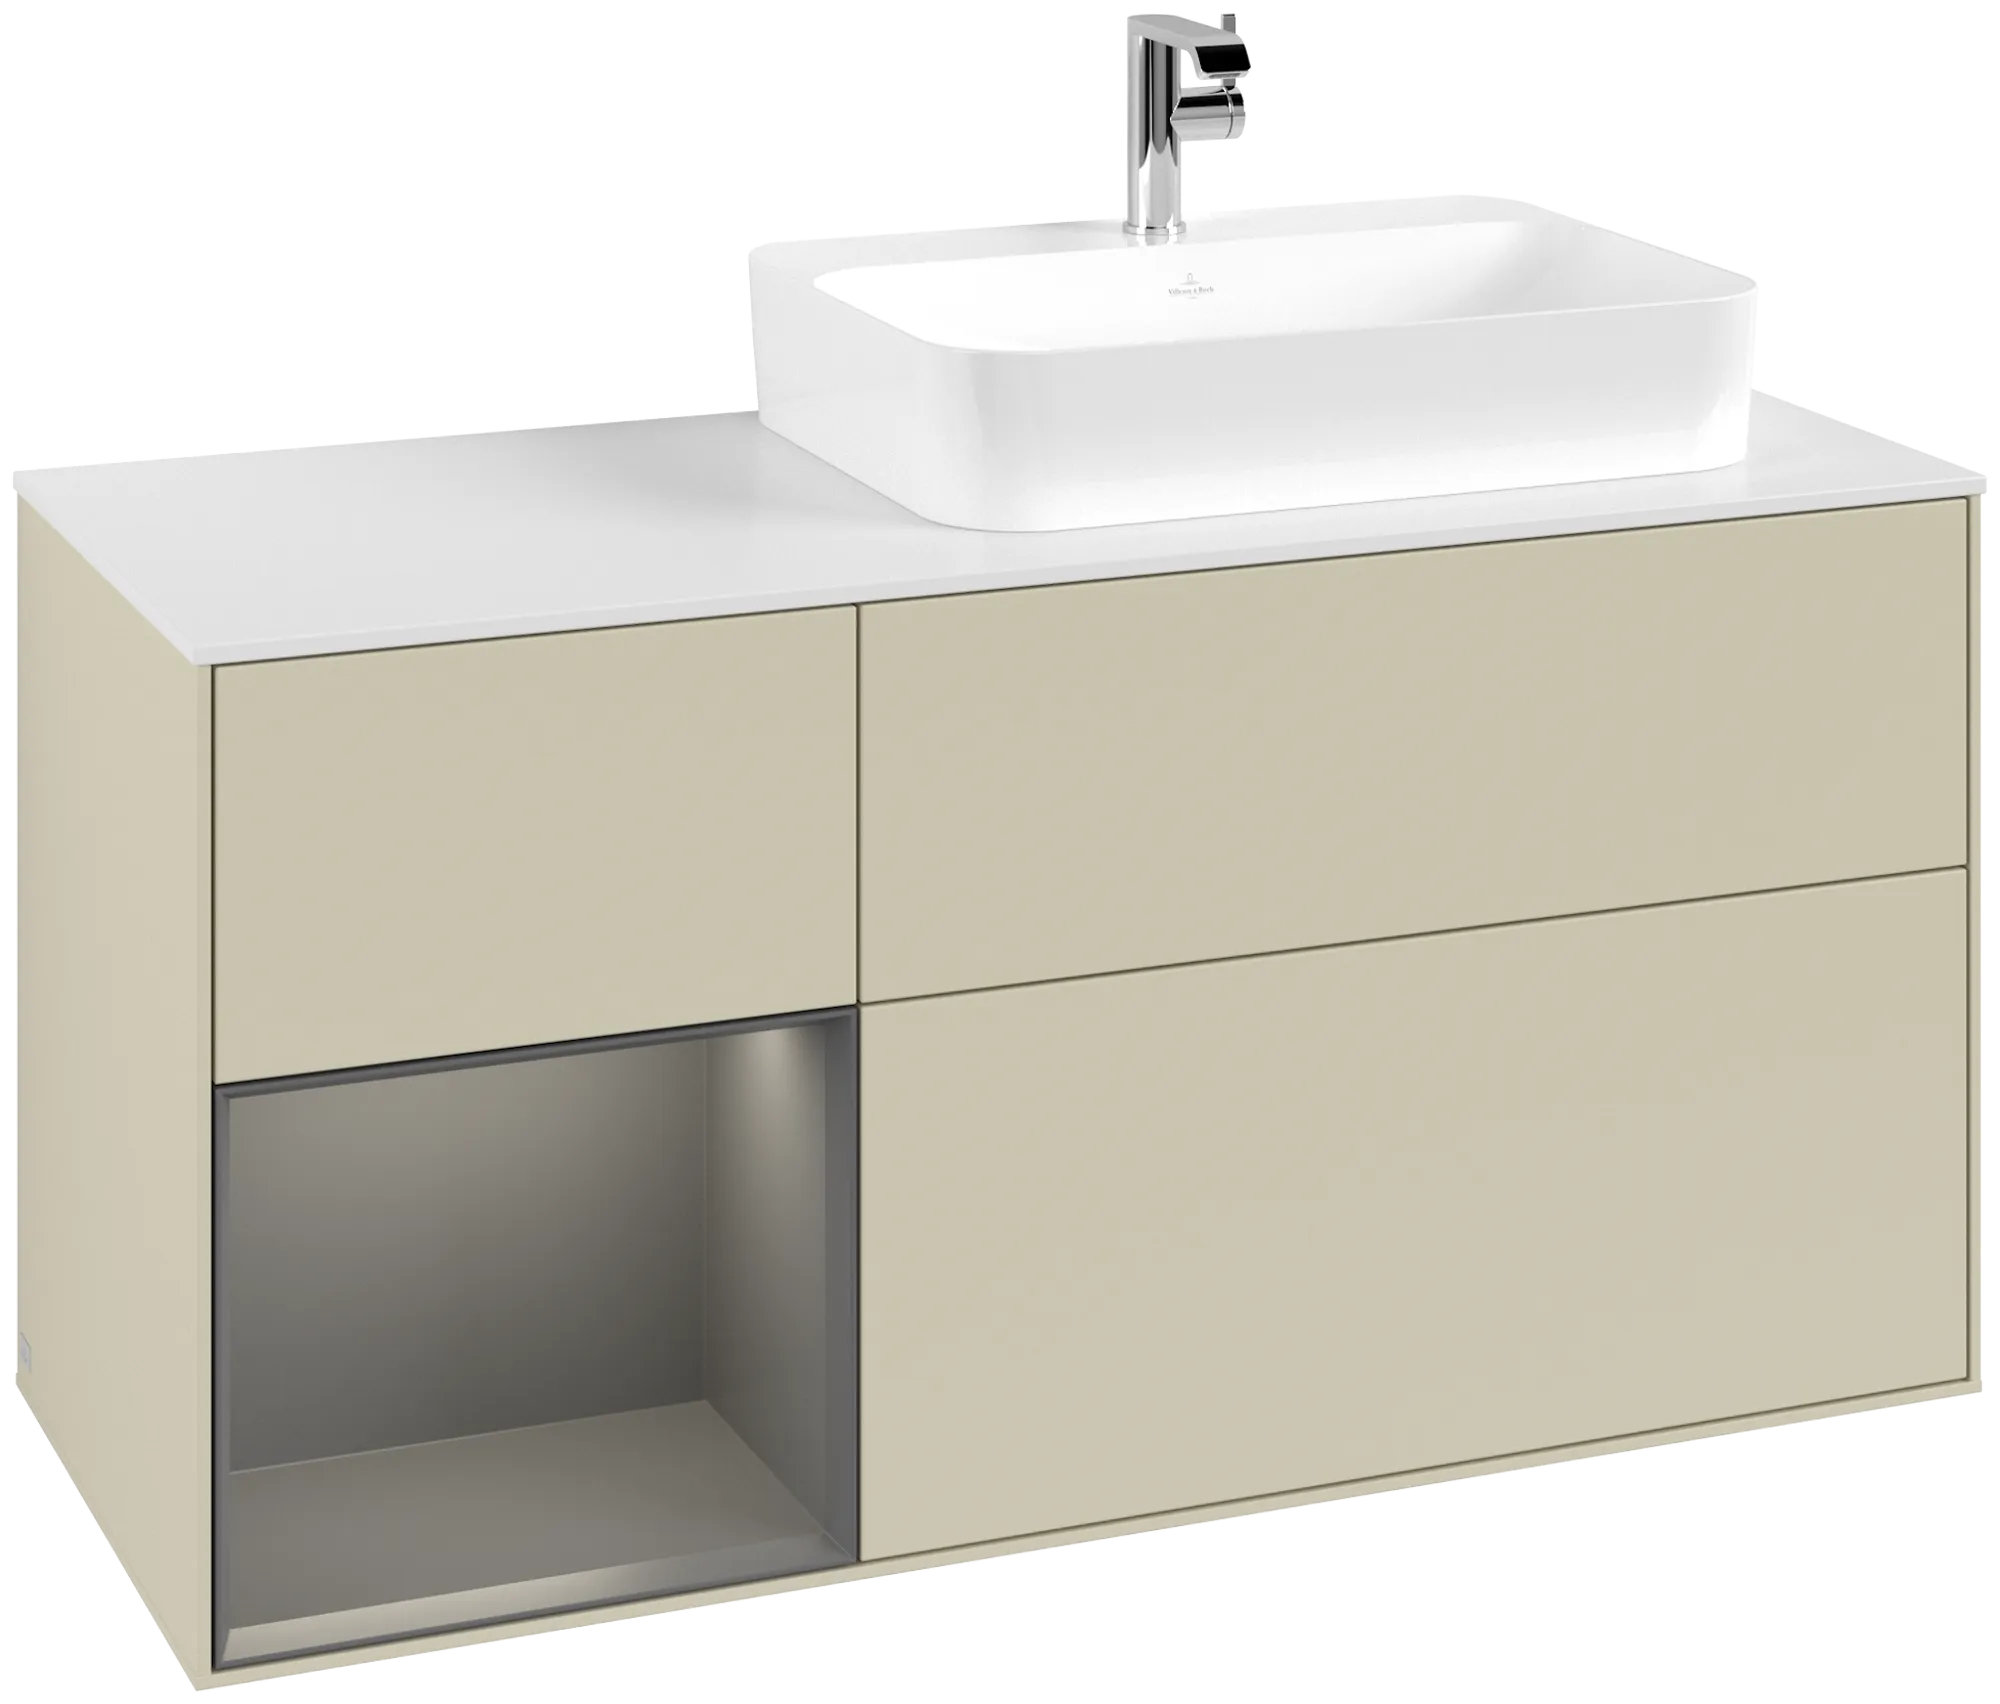 VILLEROY BOCH Finion Vanity unit, with lighting, 3 pull-out compartments, 1200 x 603 x 501 mm, Silk Grey Matt Lacquer / Anthracite Matt Lacquer / Glass White Matt #G391GKHJ resmi